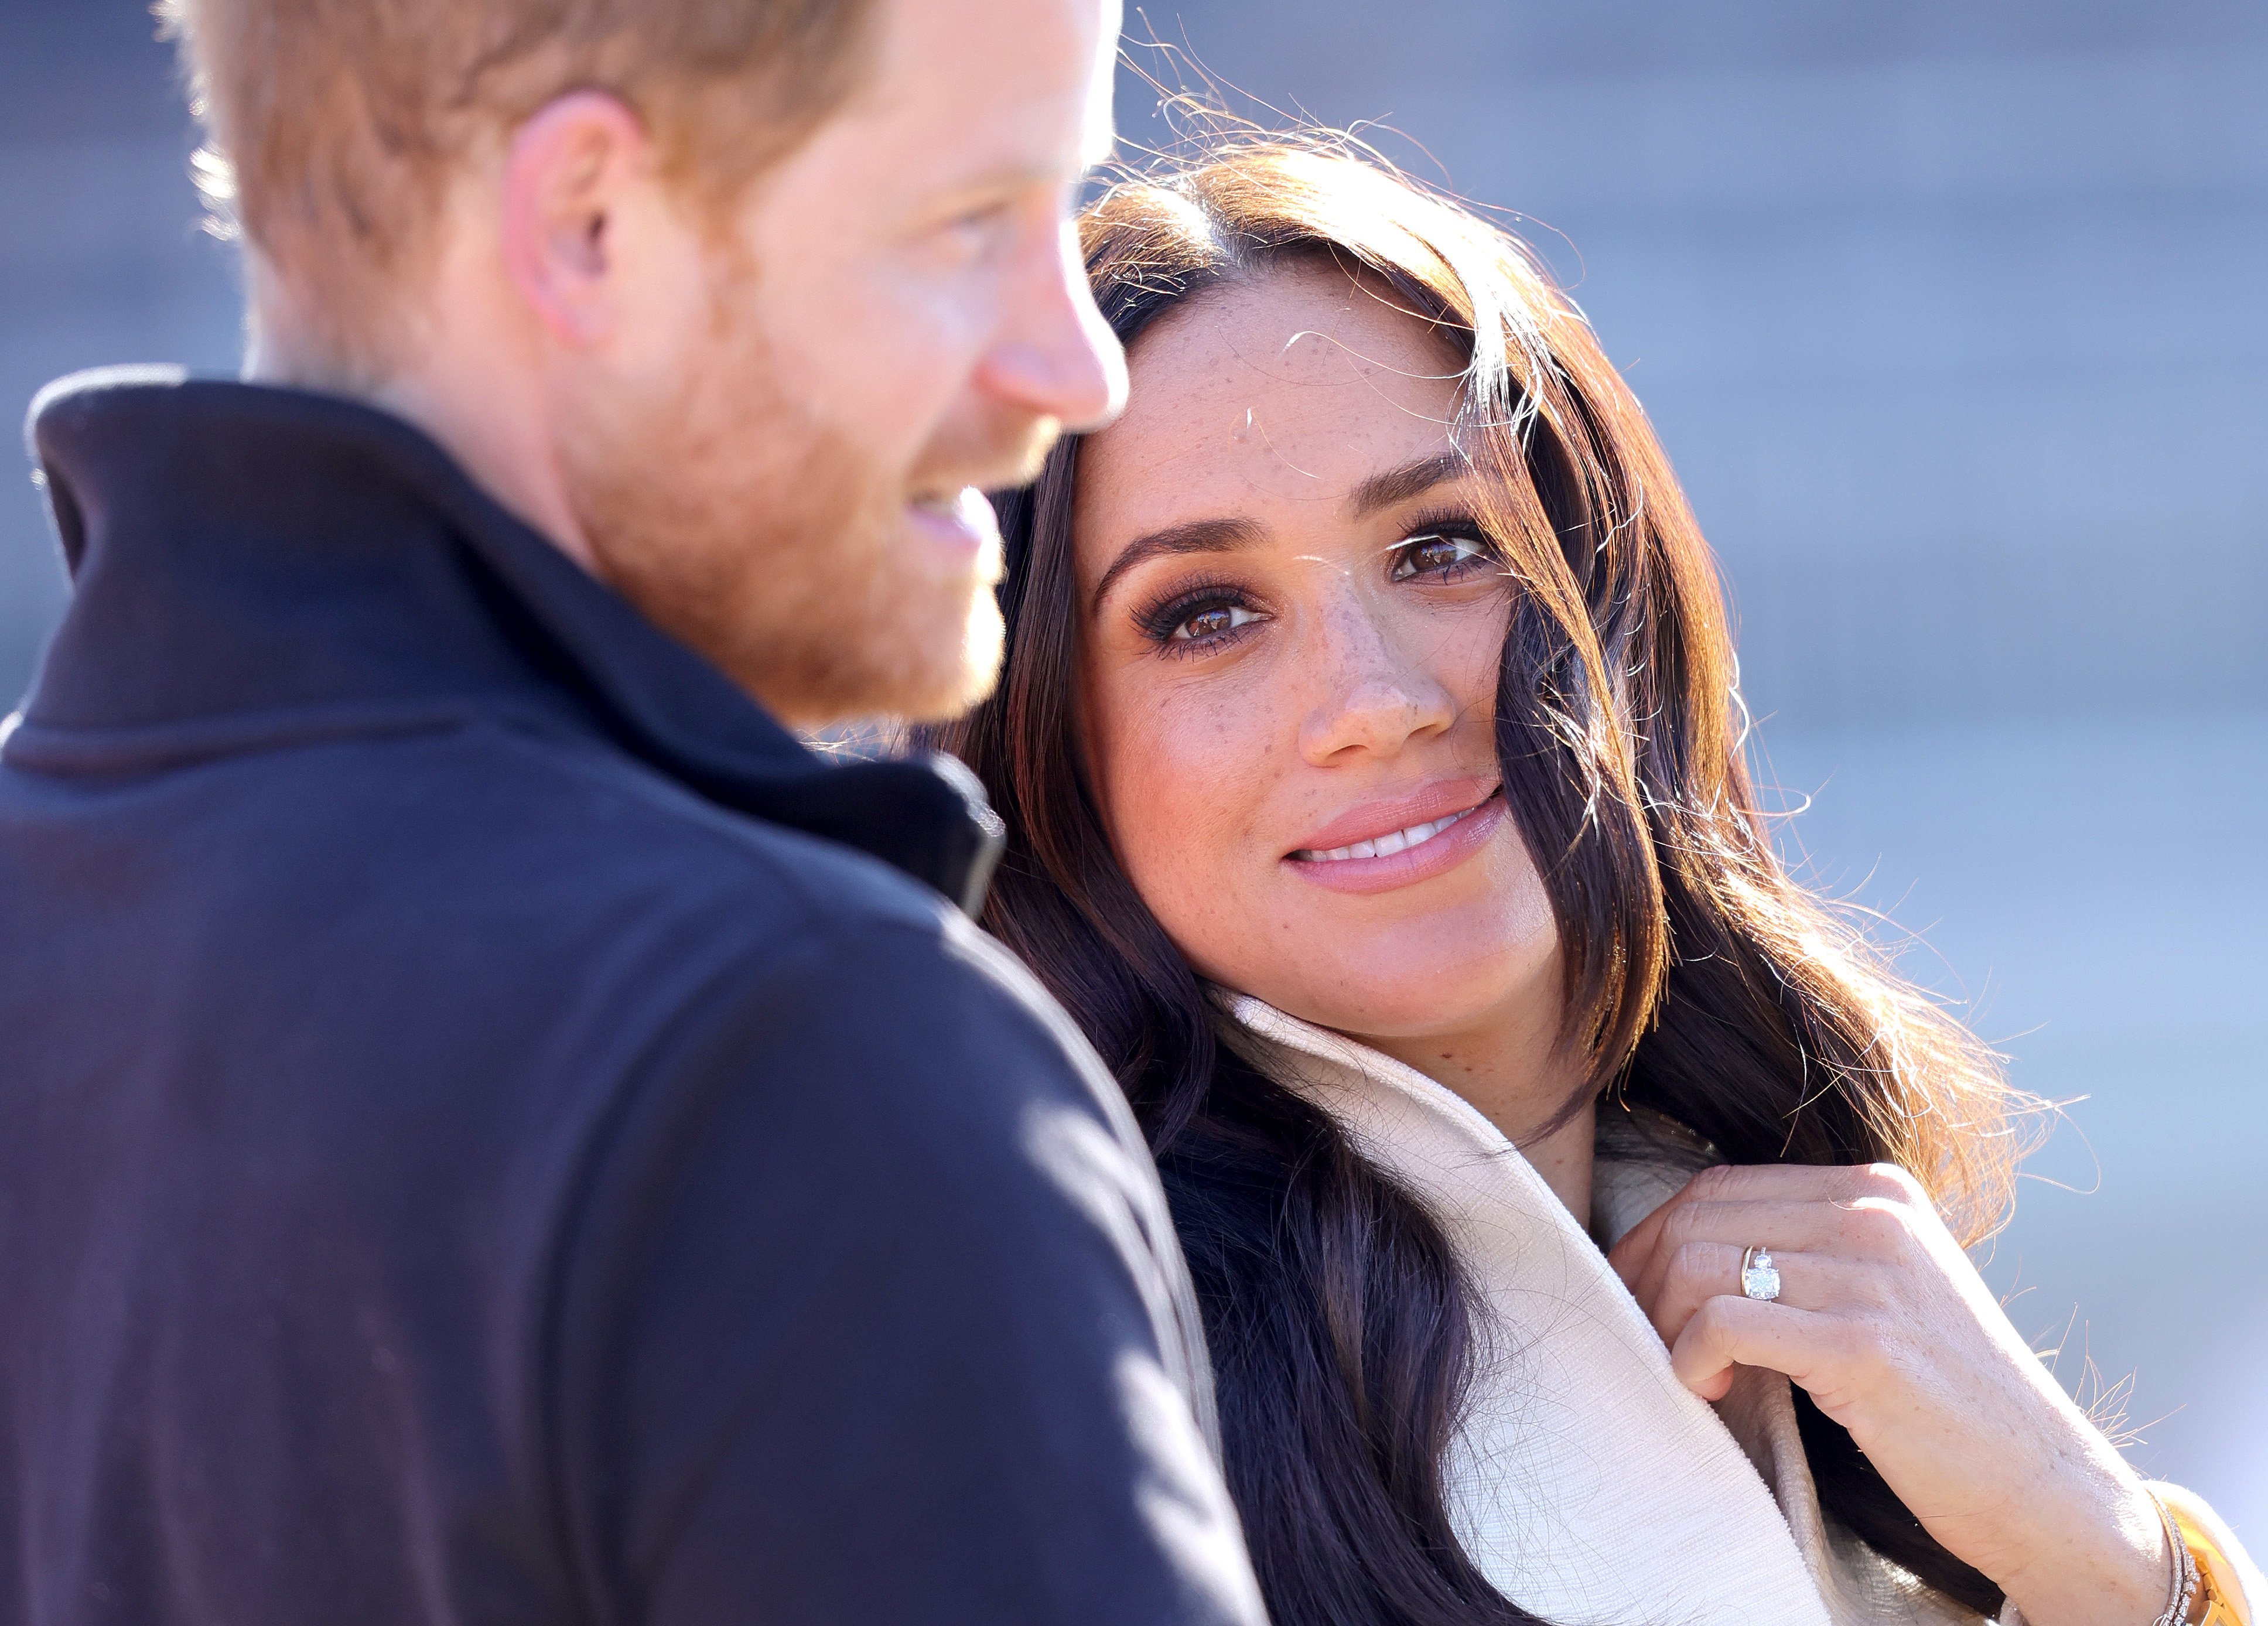 Meghan Markle seems to have carved a picture perfect life for herself and Prince Harry in America. Photo: Getty